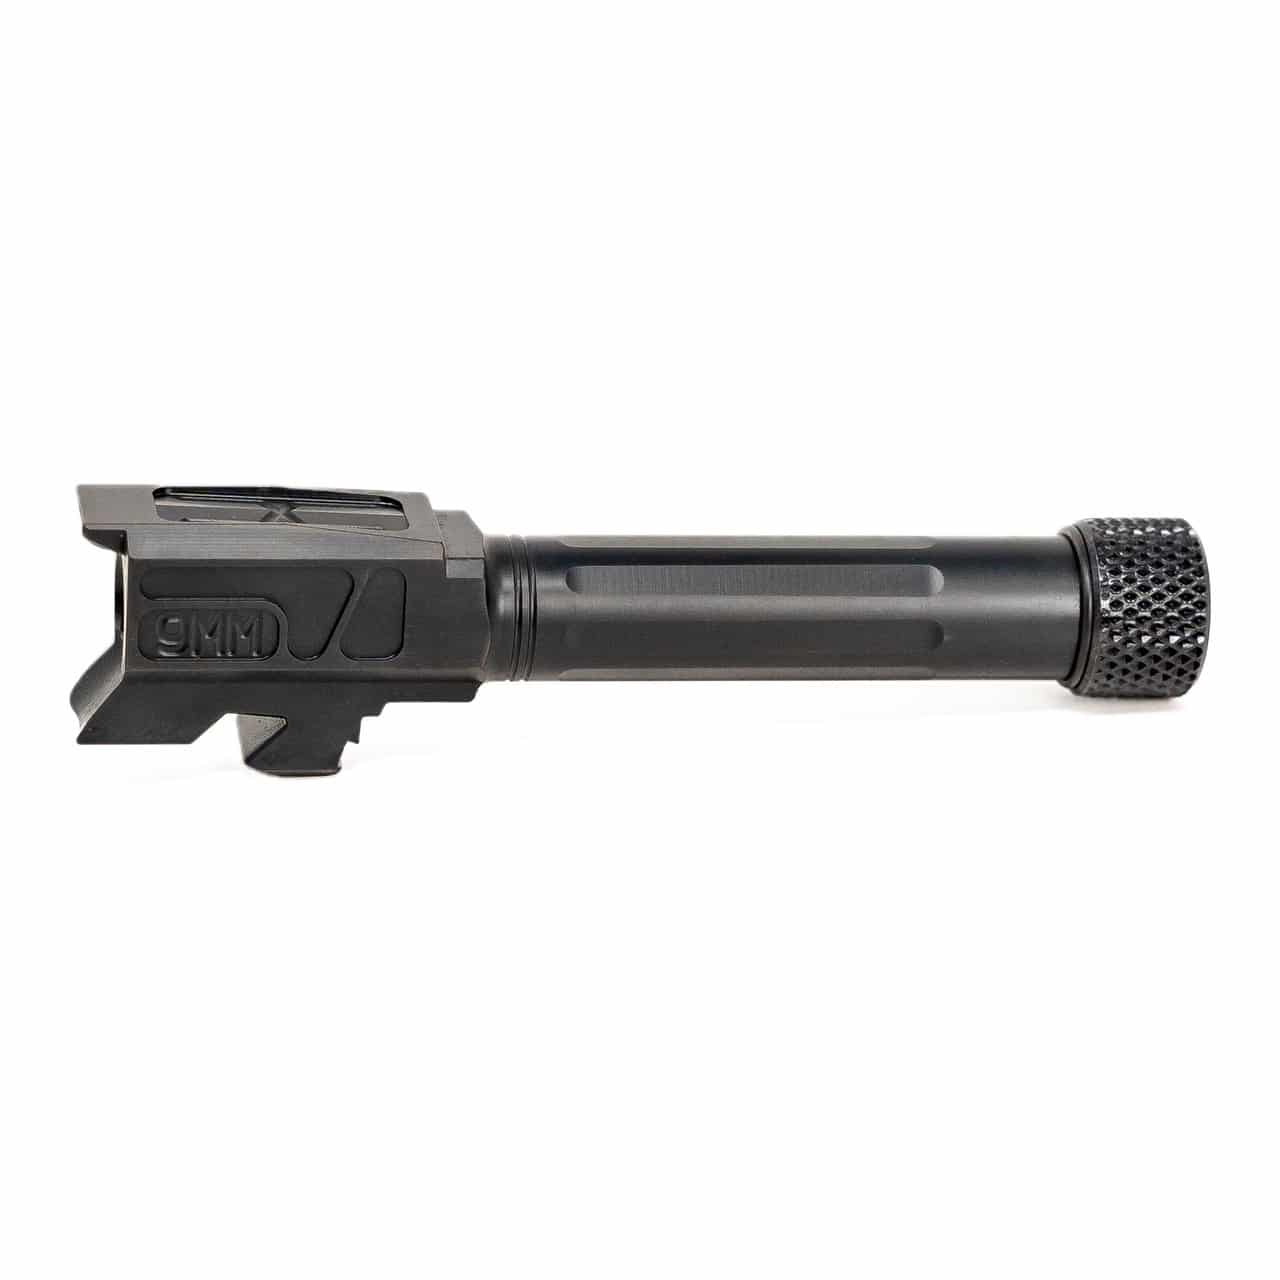 Featured image for “Faxon Match Series Threaded Barrel For Glock G43/43X”